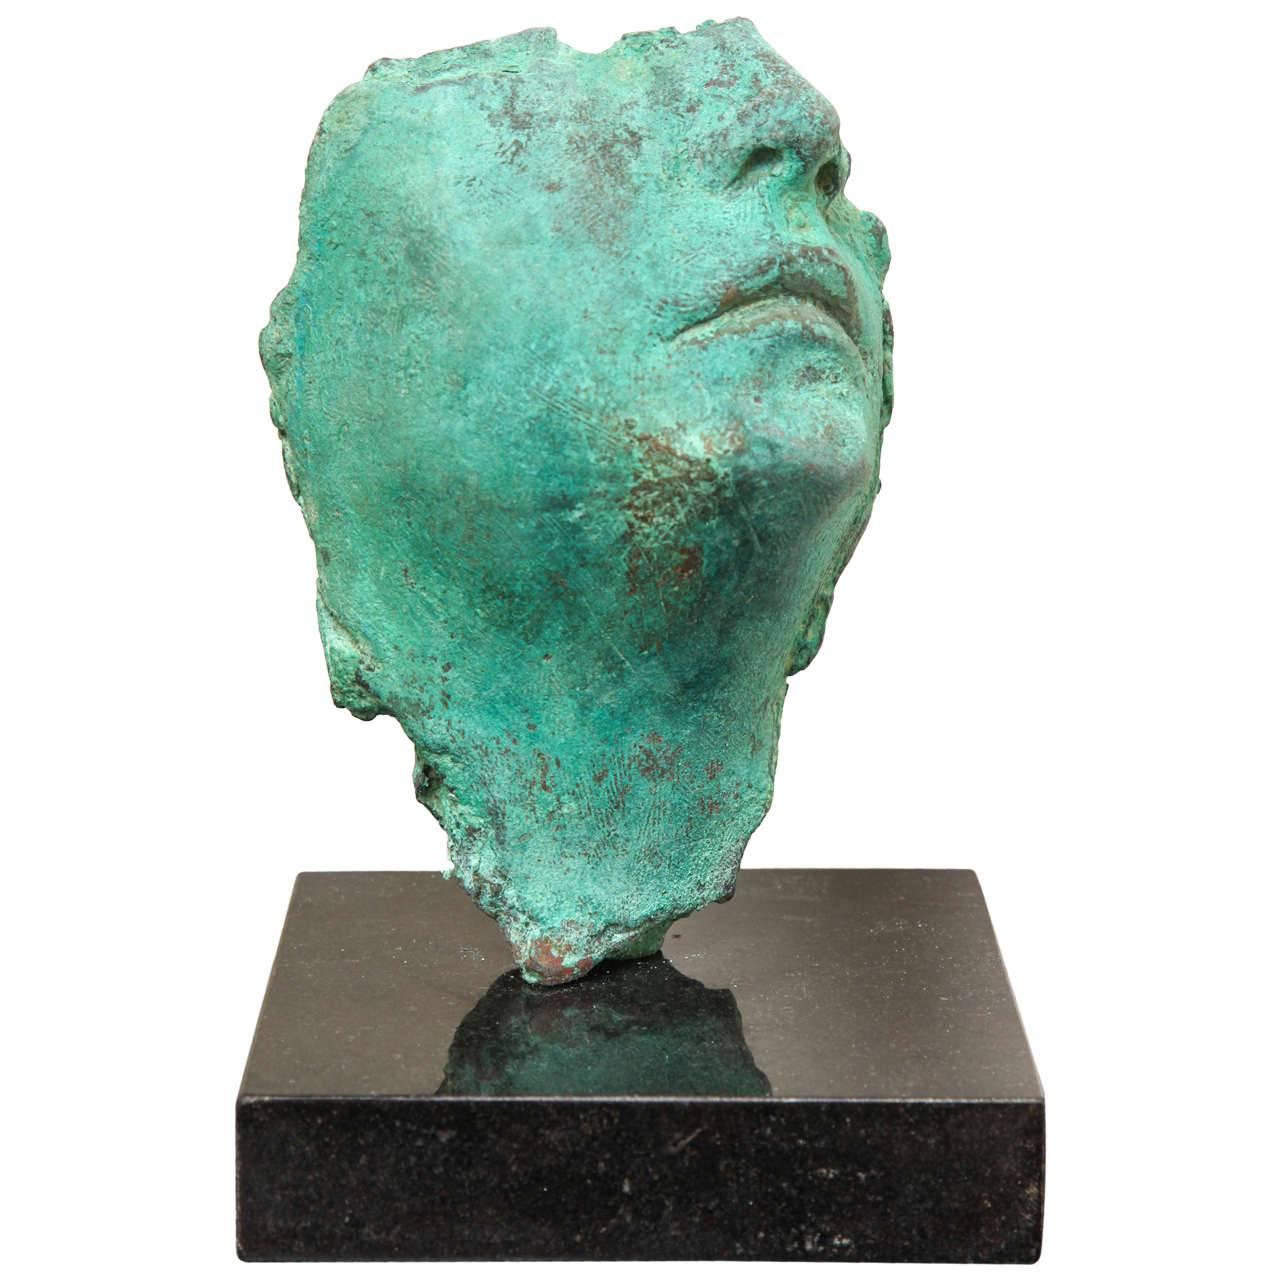 The cast bronze with green patina on granite base is a unique sculpture by the artist. This one-of-a-kind piece. Looks/feels like Gods of Small Things. Piece of Art is signed  by the artist.